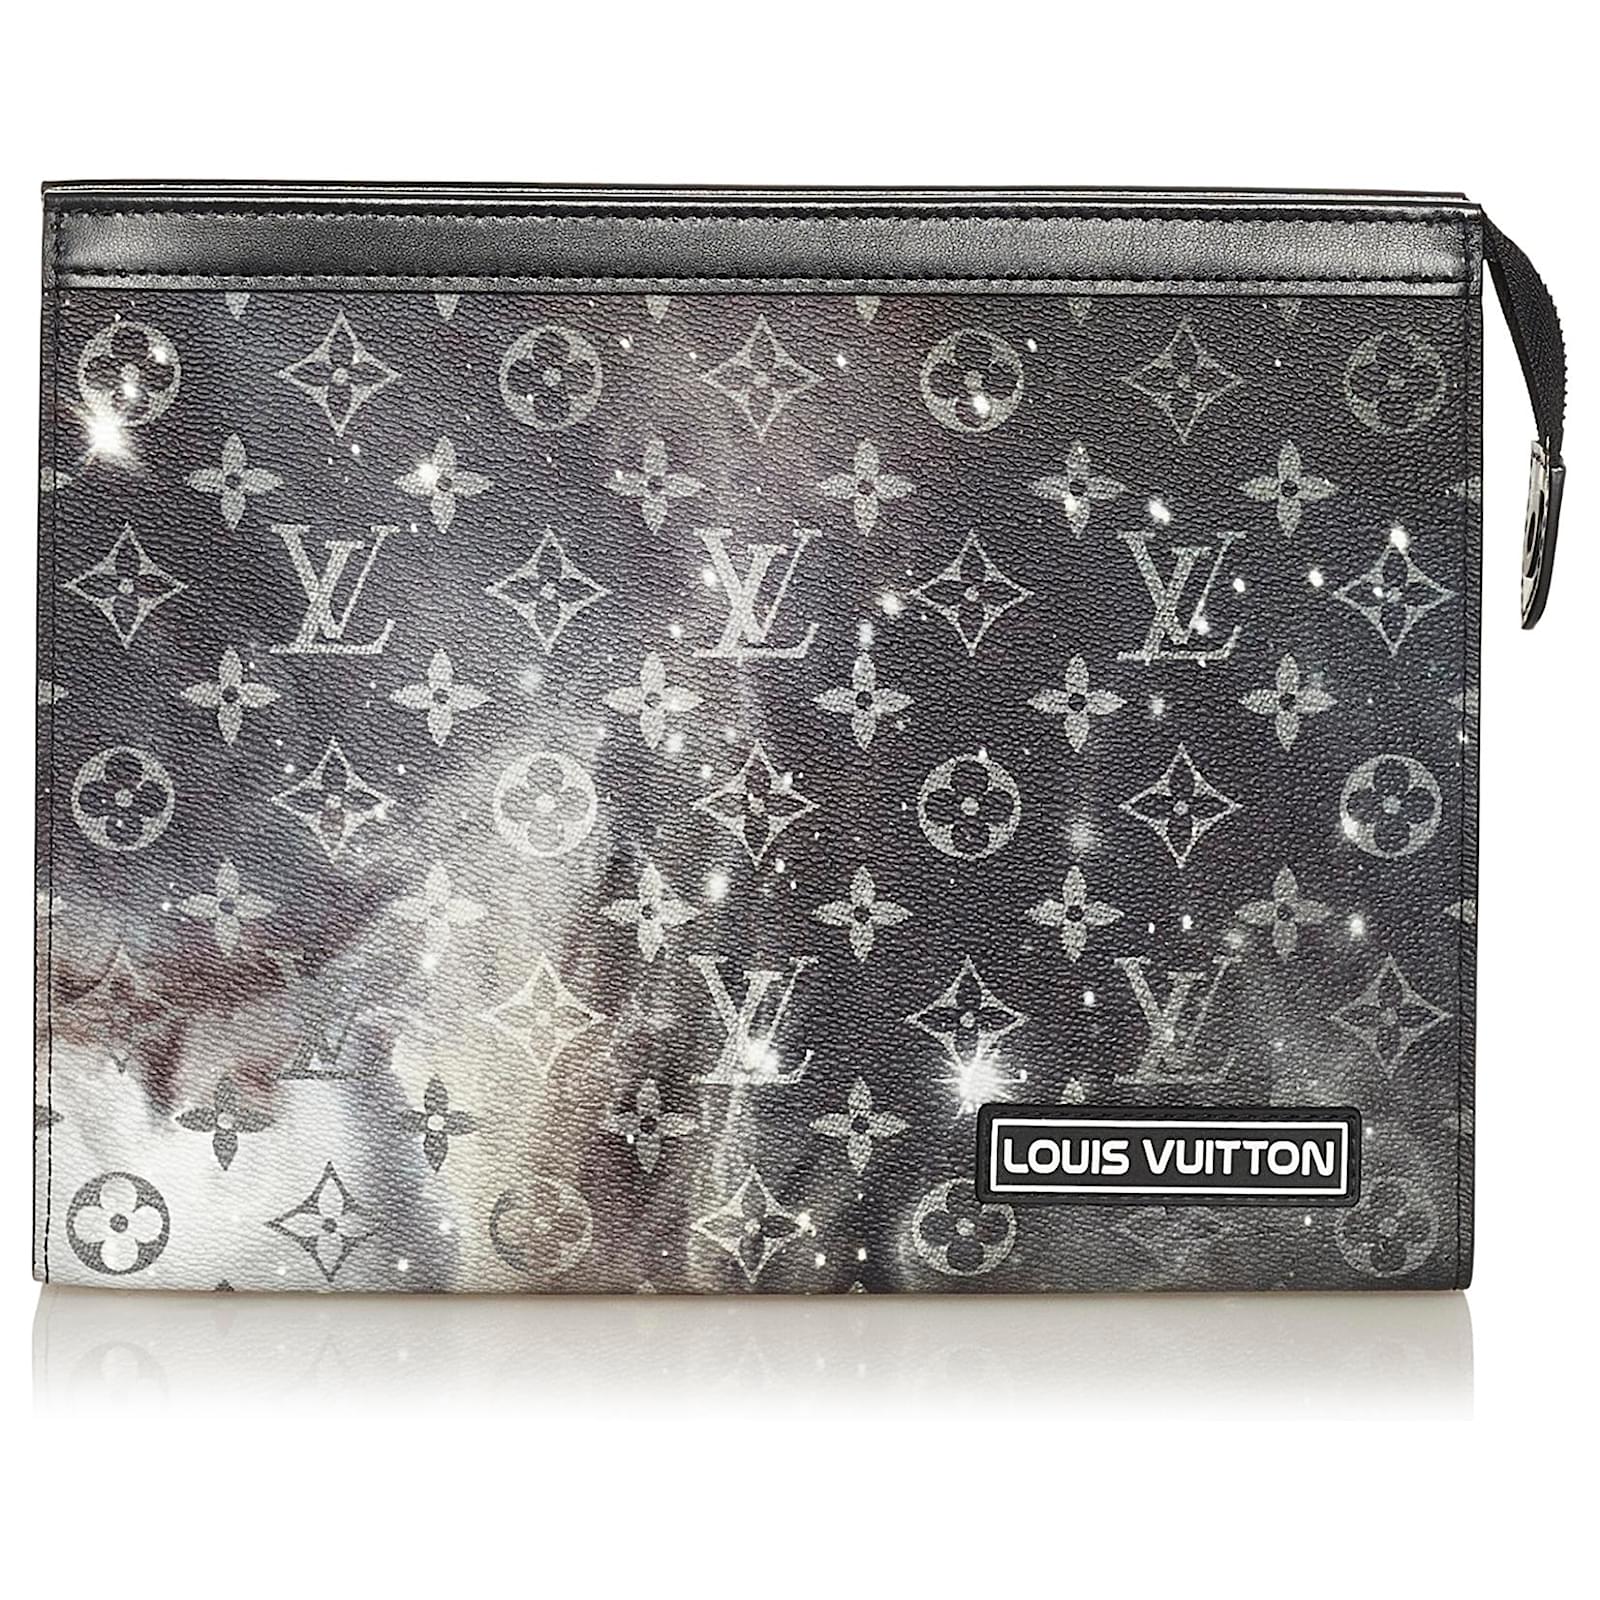 Pochette Voyage Monogram Other - Wallets and Small Leather Goods